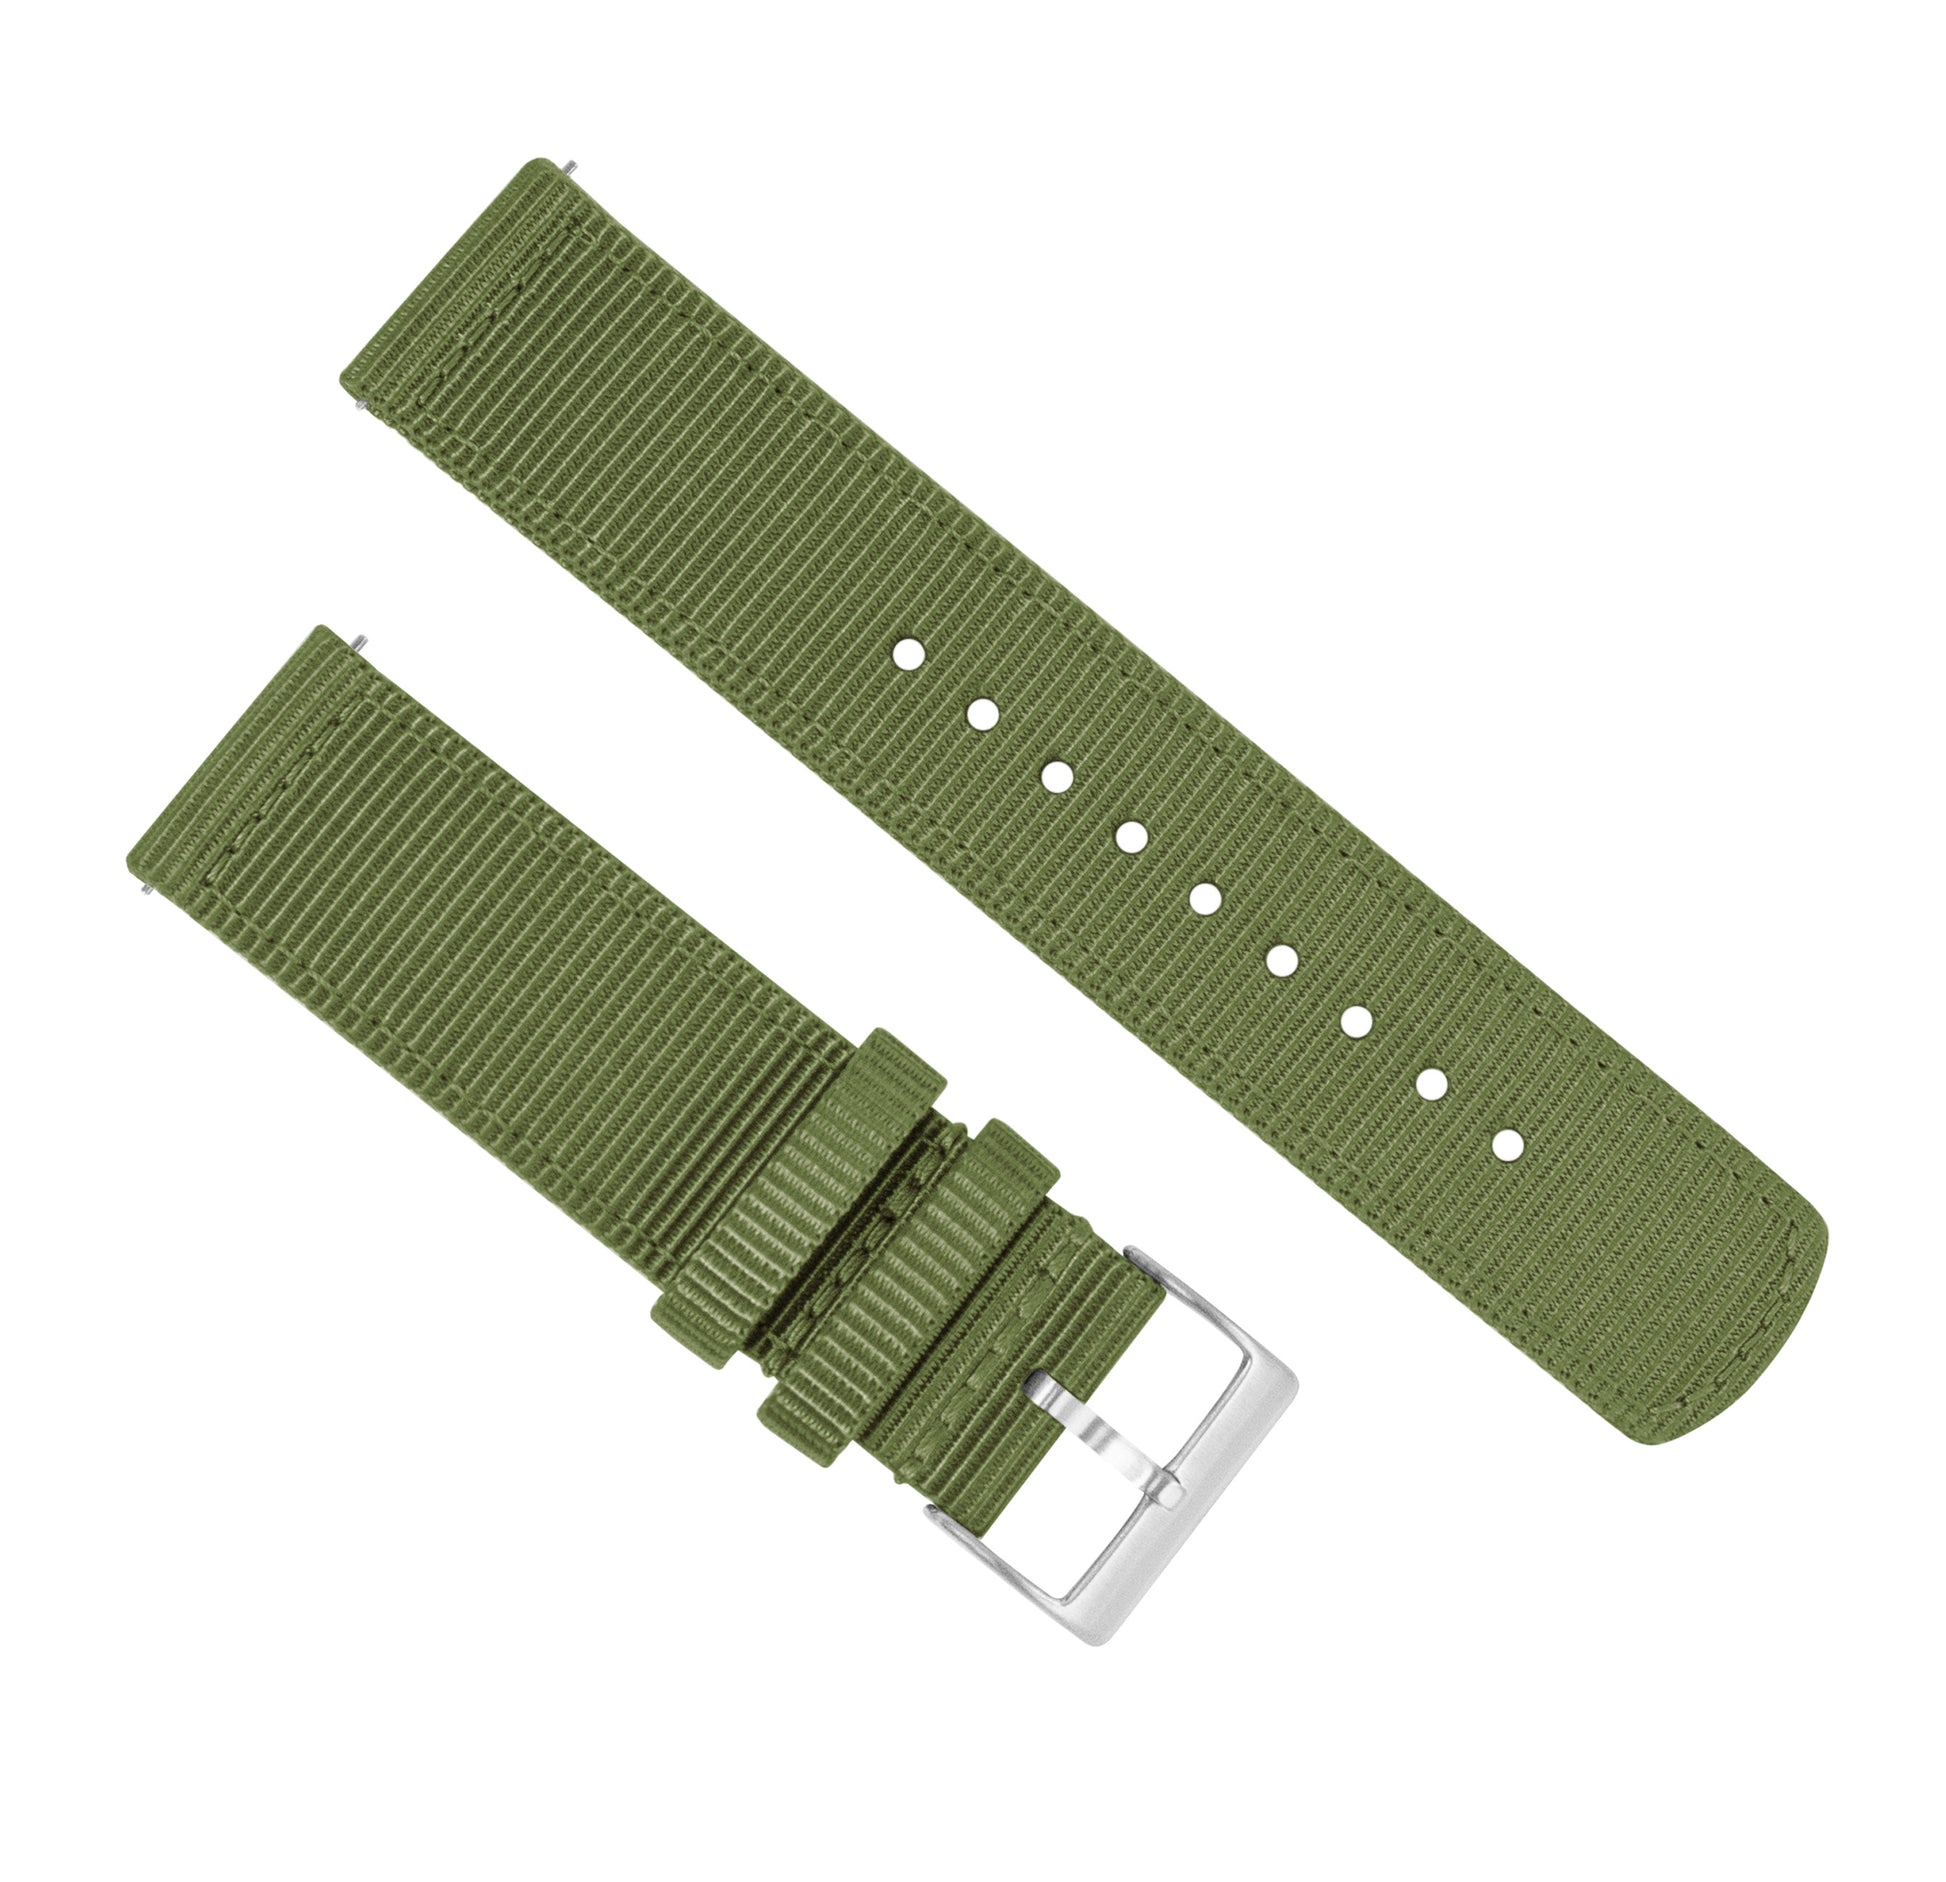 Olive Green & Tan Paracord Watch Band Strap Lug size 22mm, 24mm, 26mm